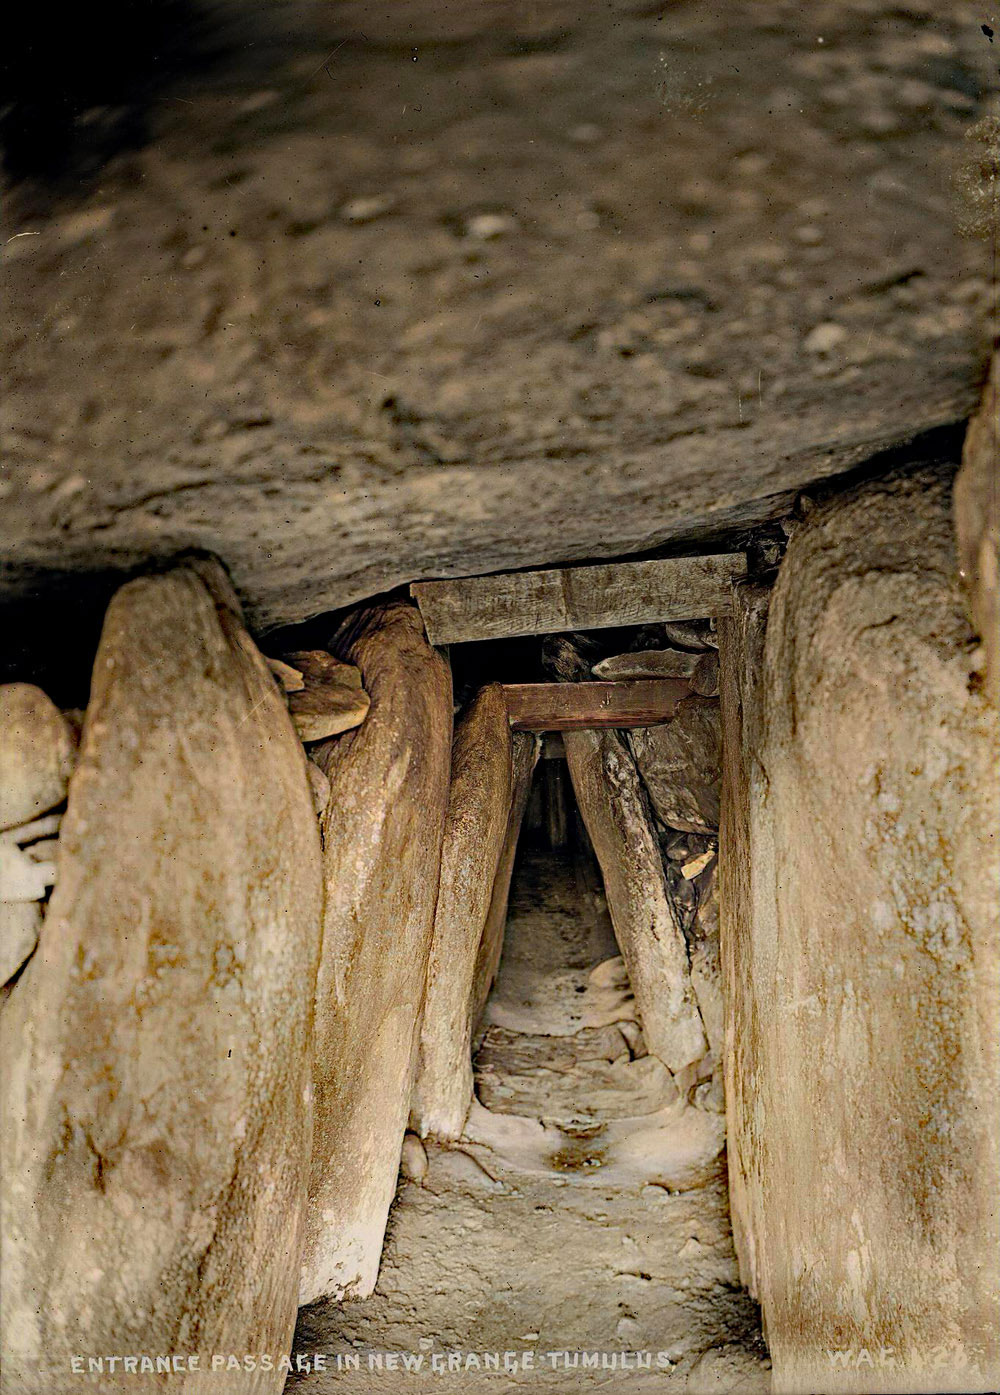 The entrance to the Great Cairn at Newgrange, photo by William A. Green.